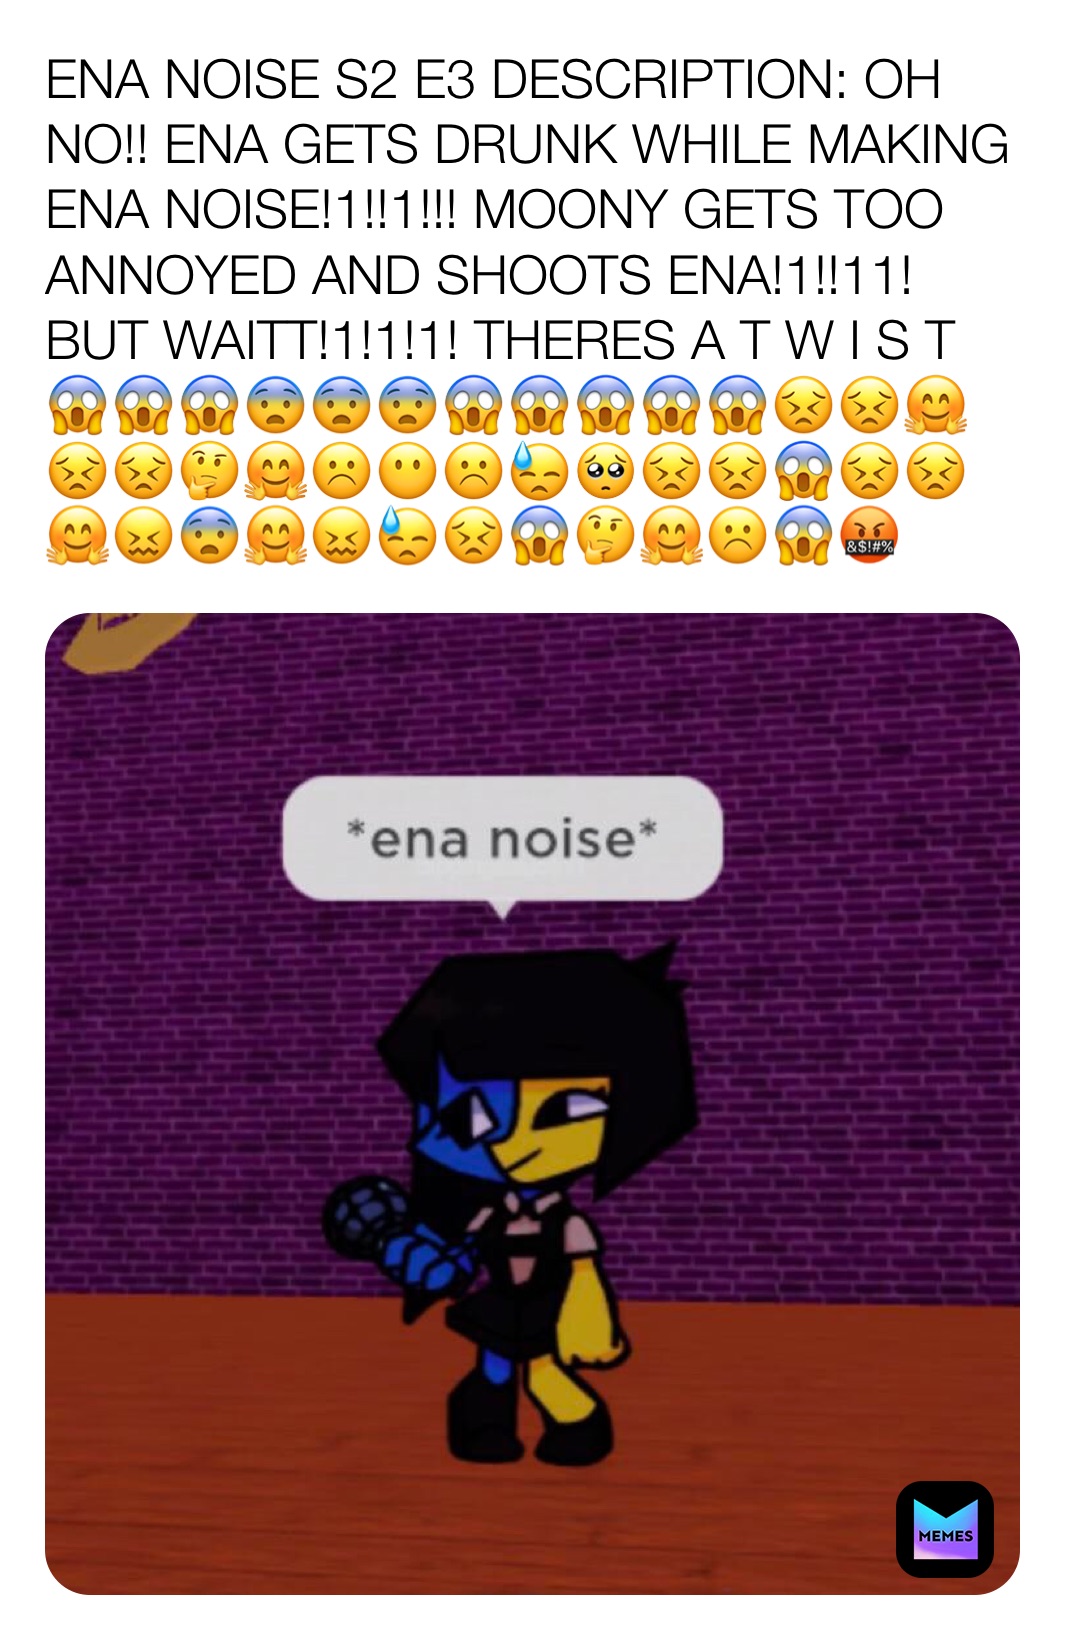 ENA NOISE S2 E3 DESCRIPTION: OH NO!! ENA GETS DRUNK WHILE MAKING ENA NOISE!1!!1!!! MOONY GETS TOO ANNOYED AND SHOOTS ENA!1!!11! BUT WAITT!1!1!1! THERES A T W I S T 😱😱😱😨😨😨😱😱😱😱😱😣😣🤗😣😣🤔🤗☹️😶☹️😓🥺😣😣😱😣😣🤗😖😨🤗😖😓😣😱🤔🤗☹️😱🤬